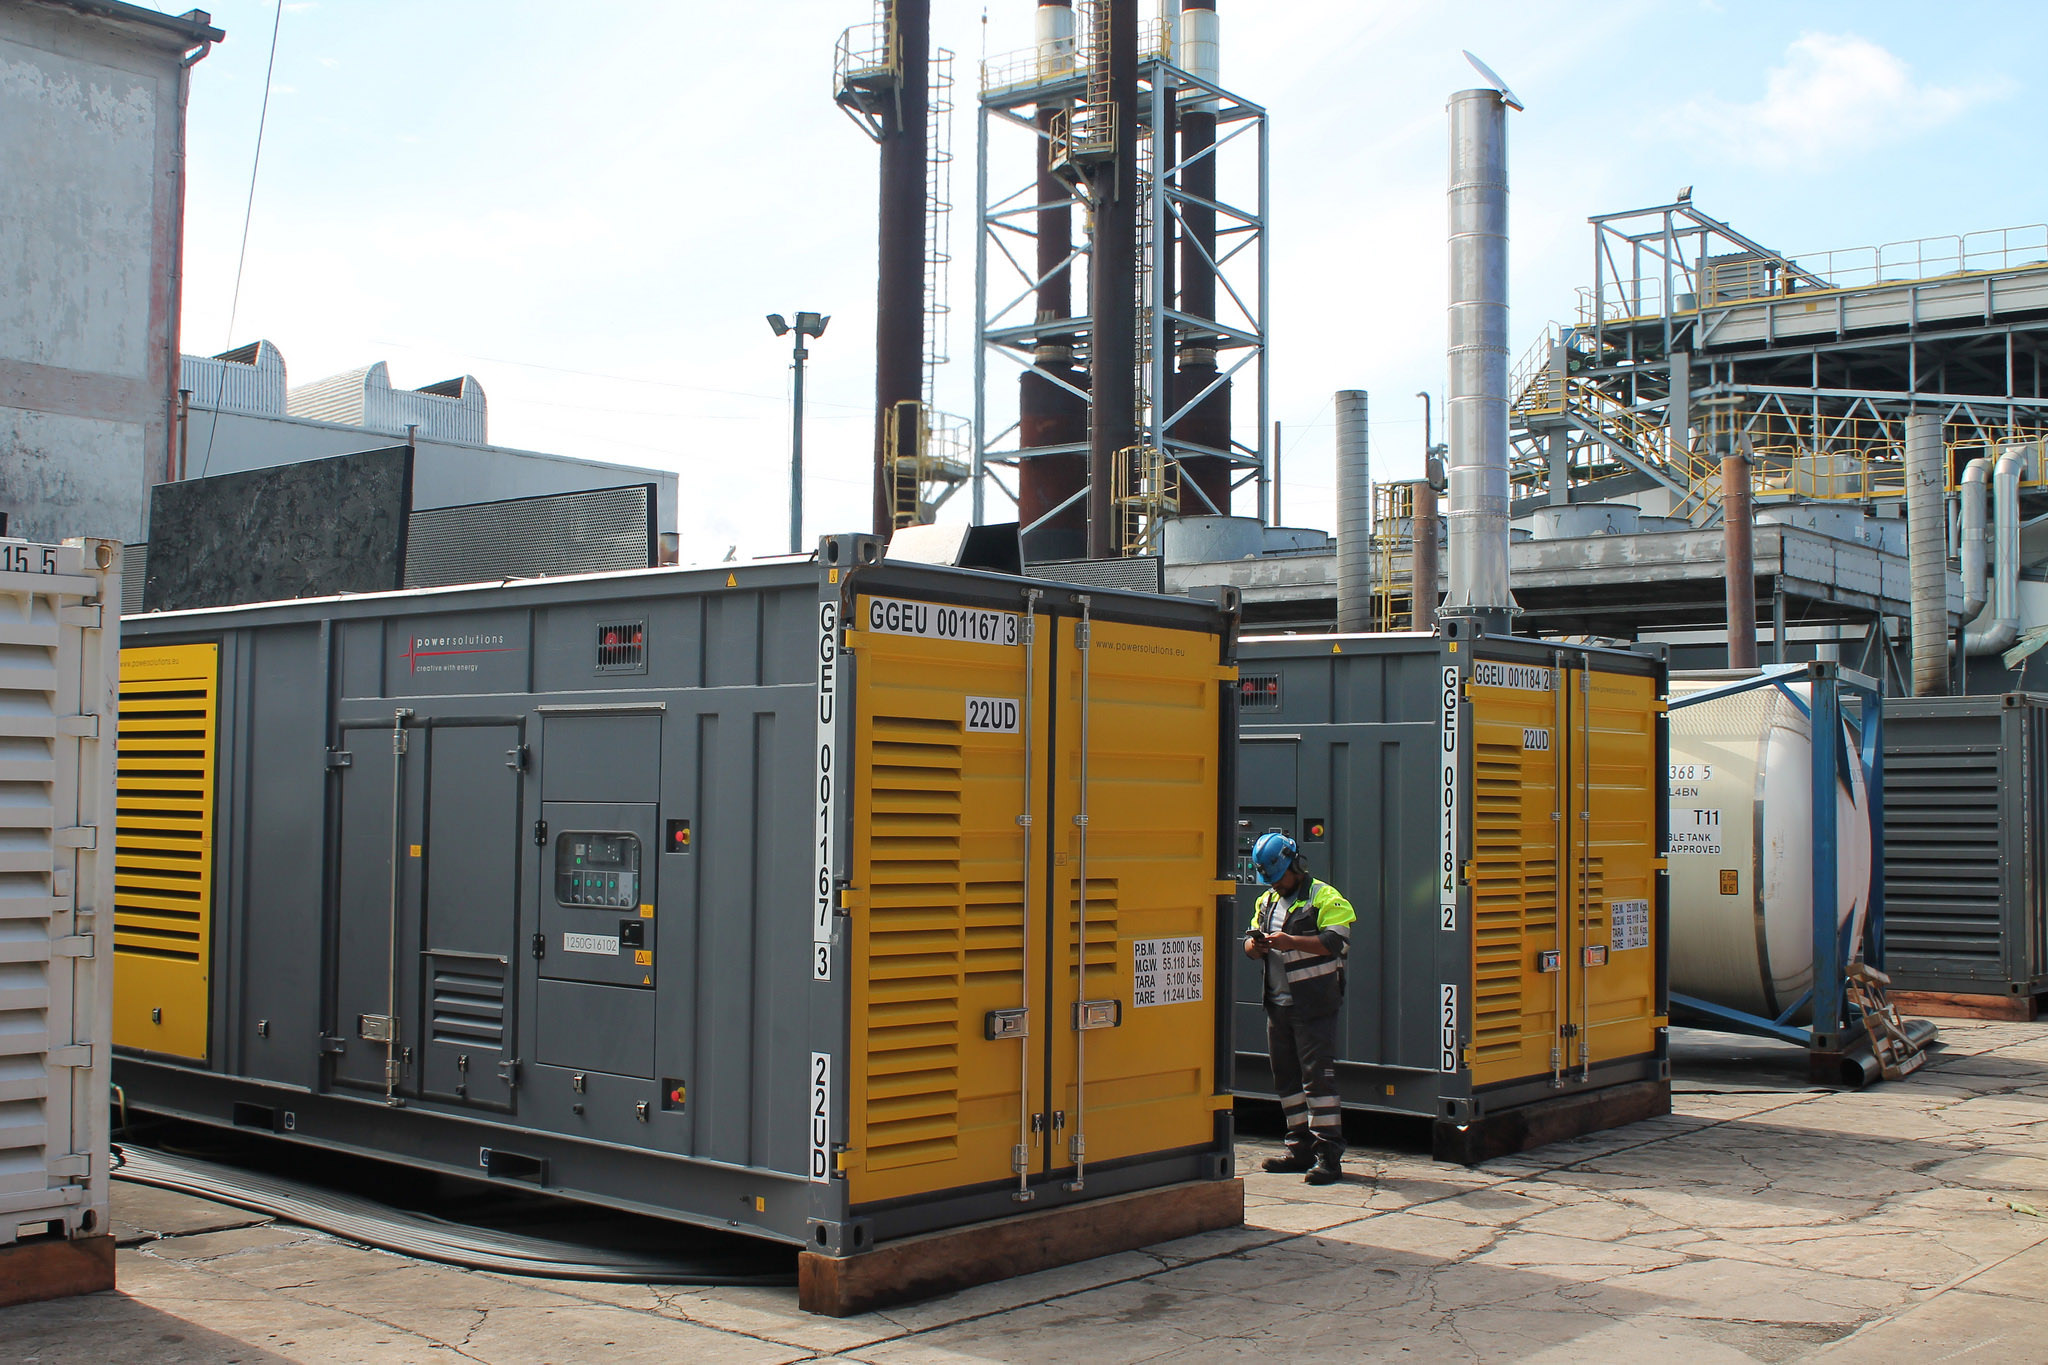 The QAC1250 generators feature a new cooling concept that uses an electric fan controlled by a variable speed drive.